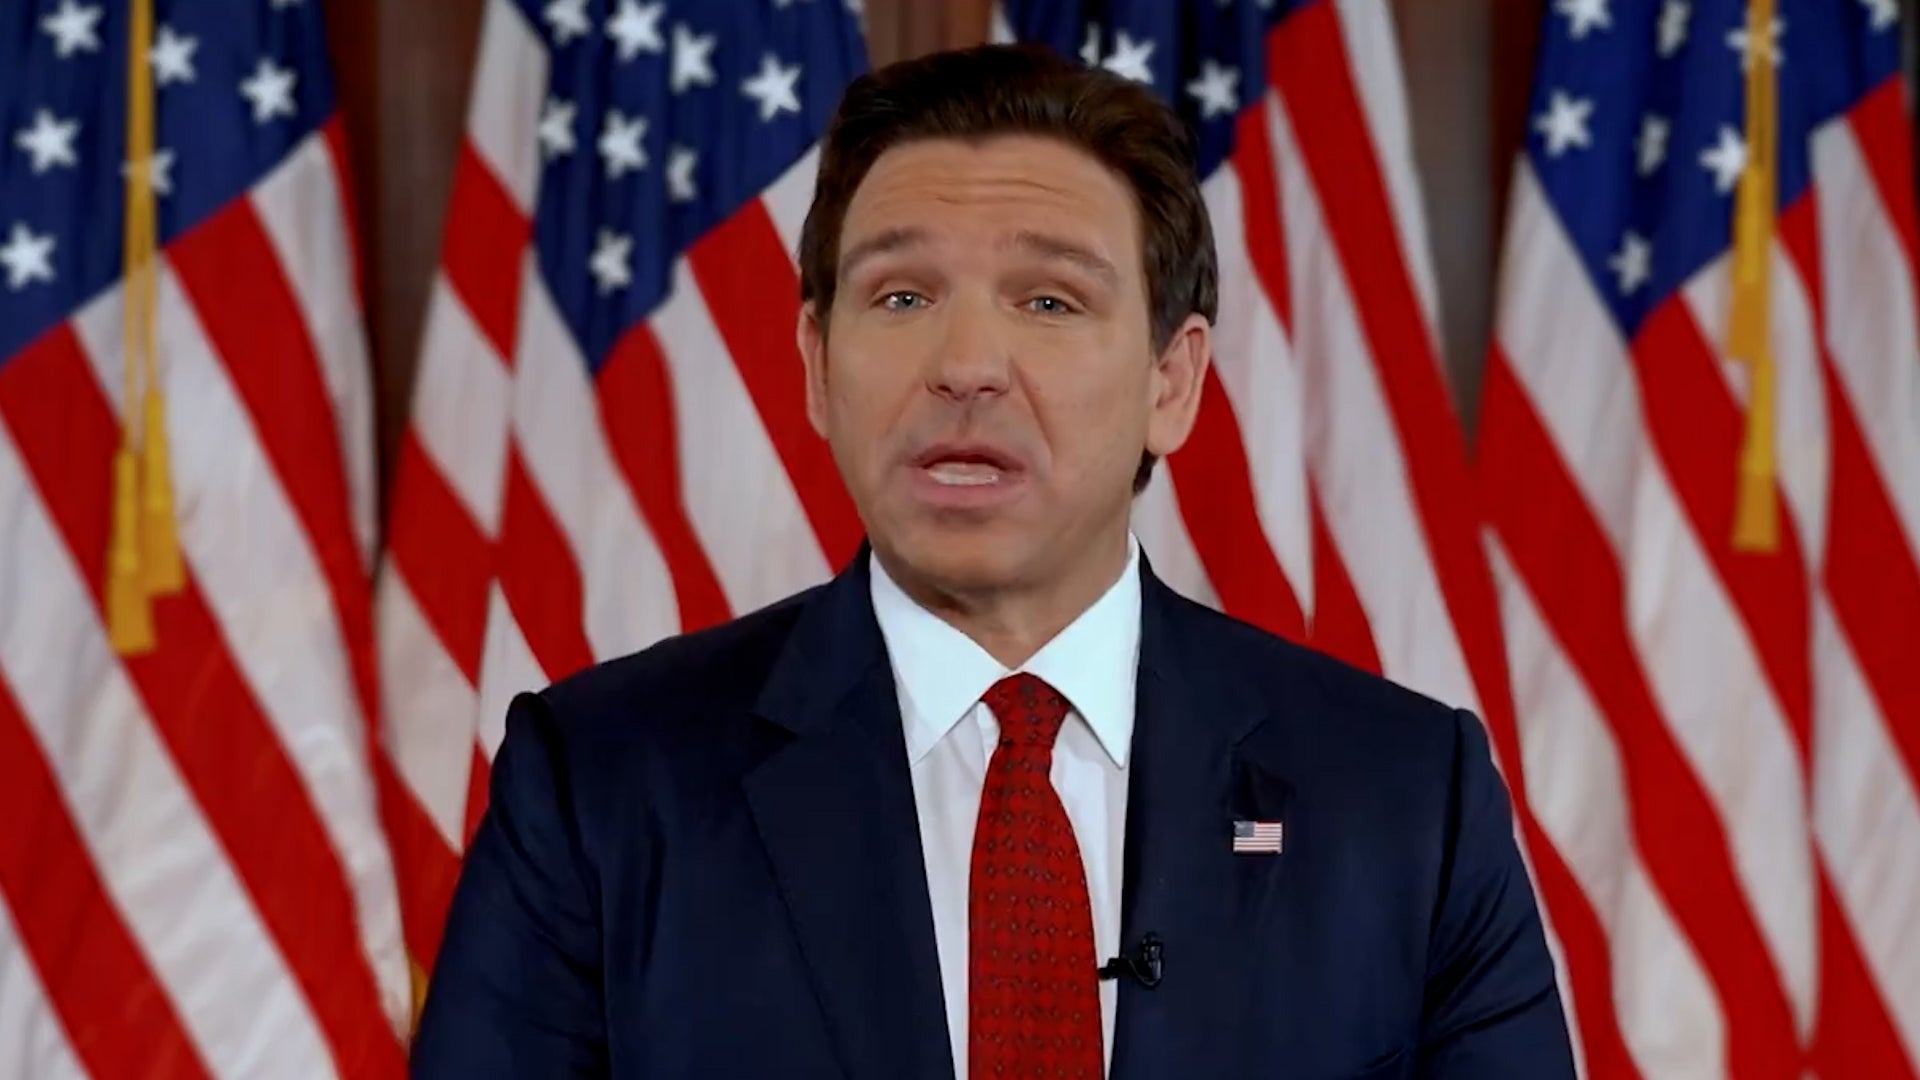 Mr DeSantis dropped out of the race to win the Republican presidential candidate nomination on Sunday